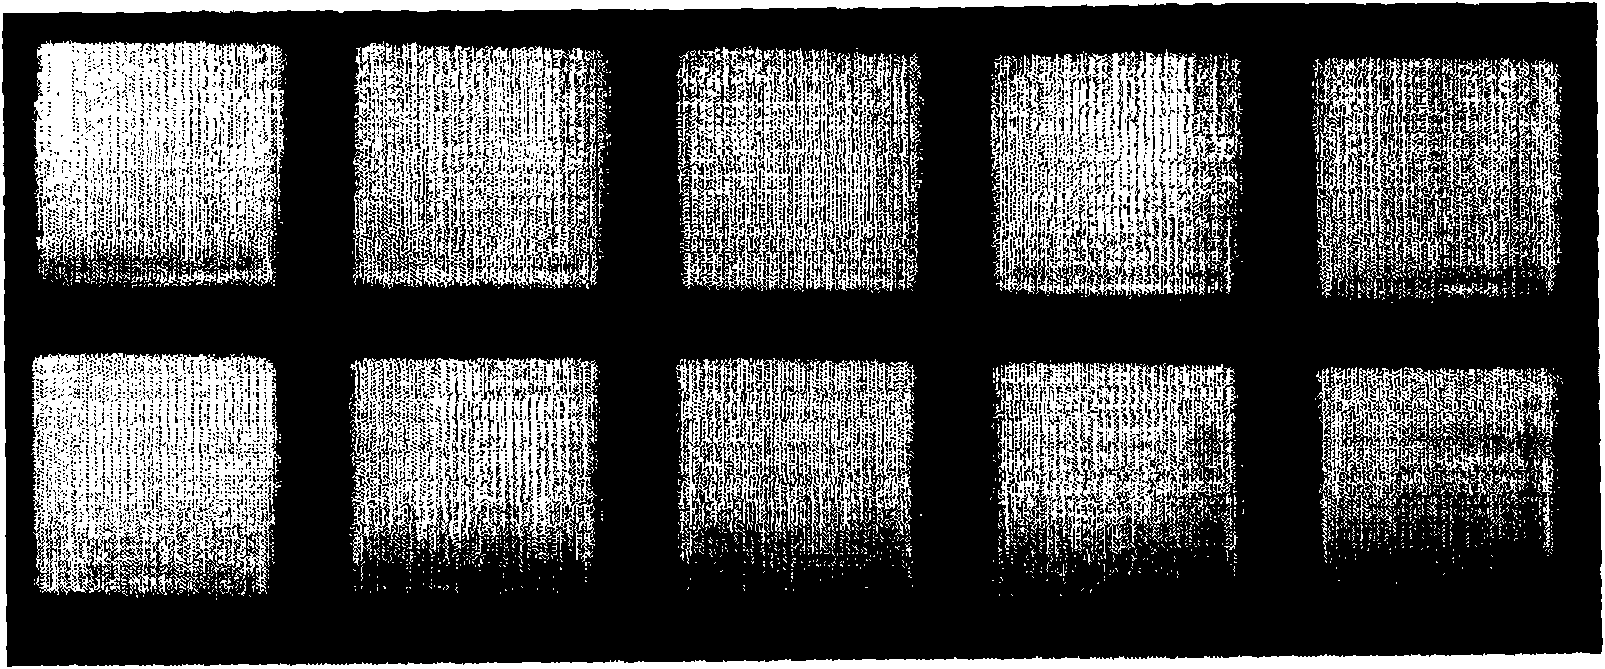 Ink composition for optoelectronic device